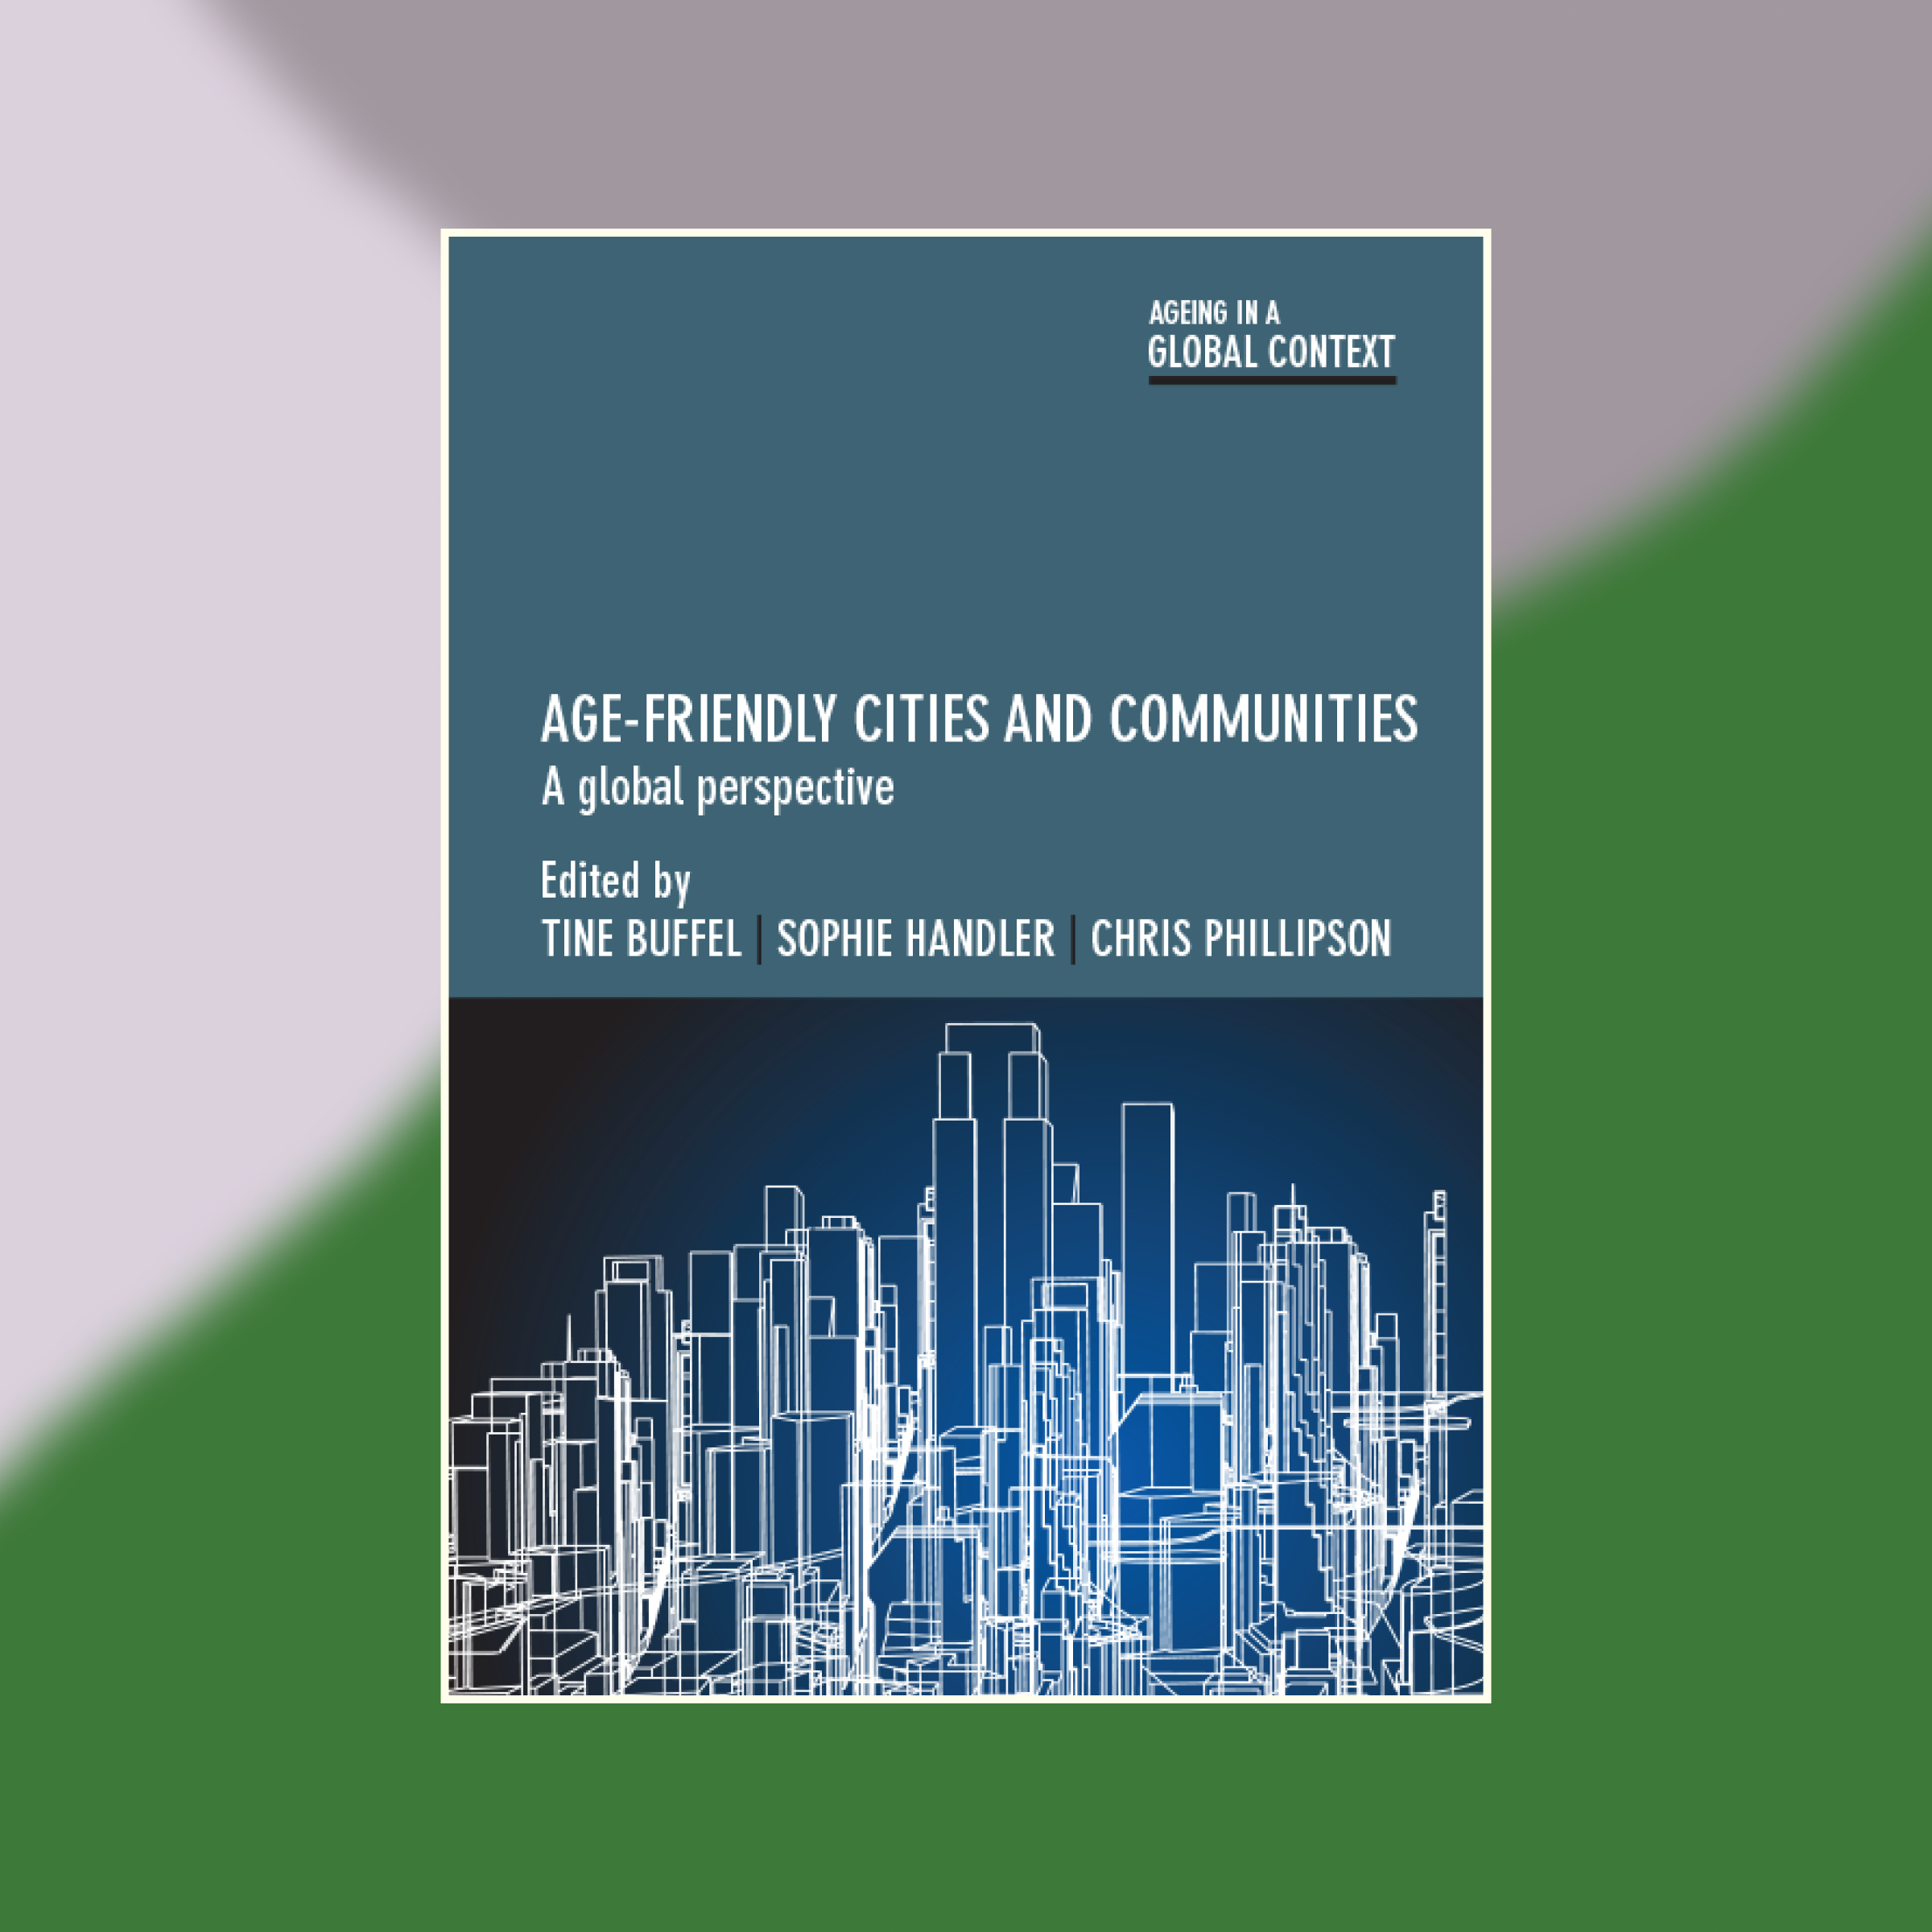 Book cover of Age-friendly cities and communities against an abstract painted background